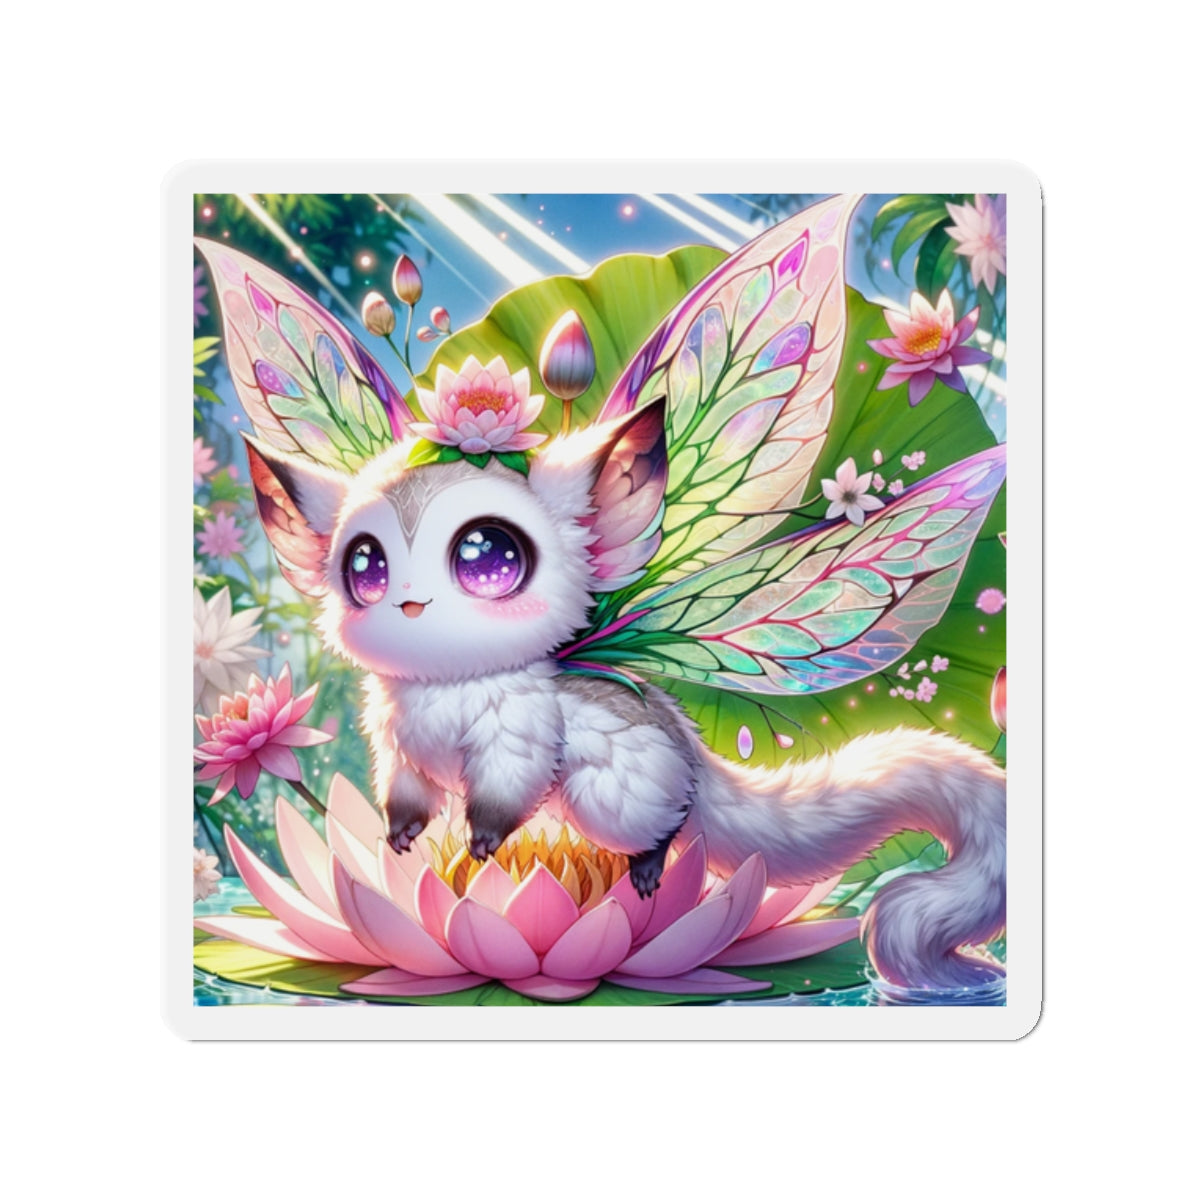 Magnet - Lotus Whiskers: The Enchanted Garden Sprite